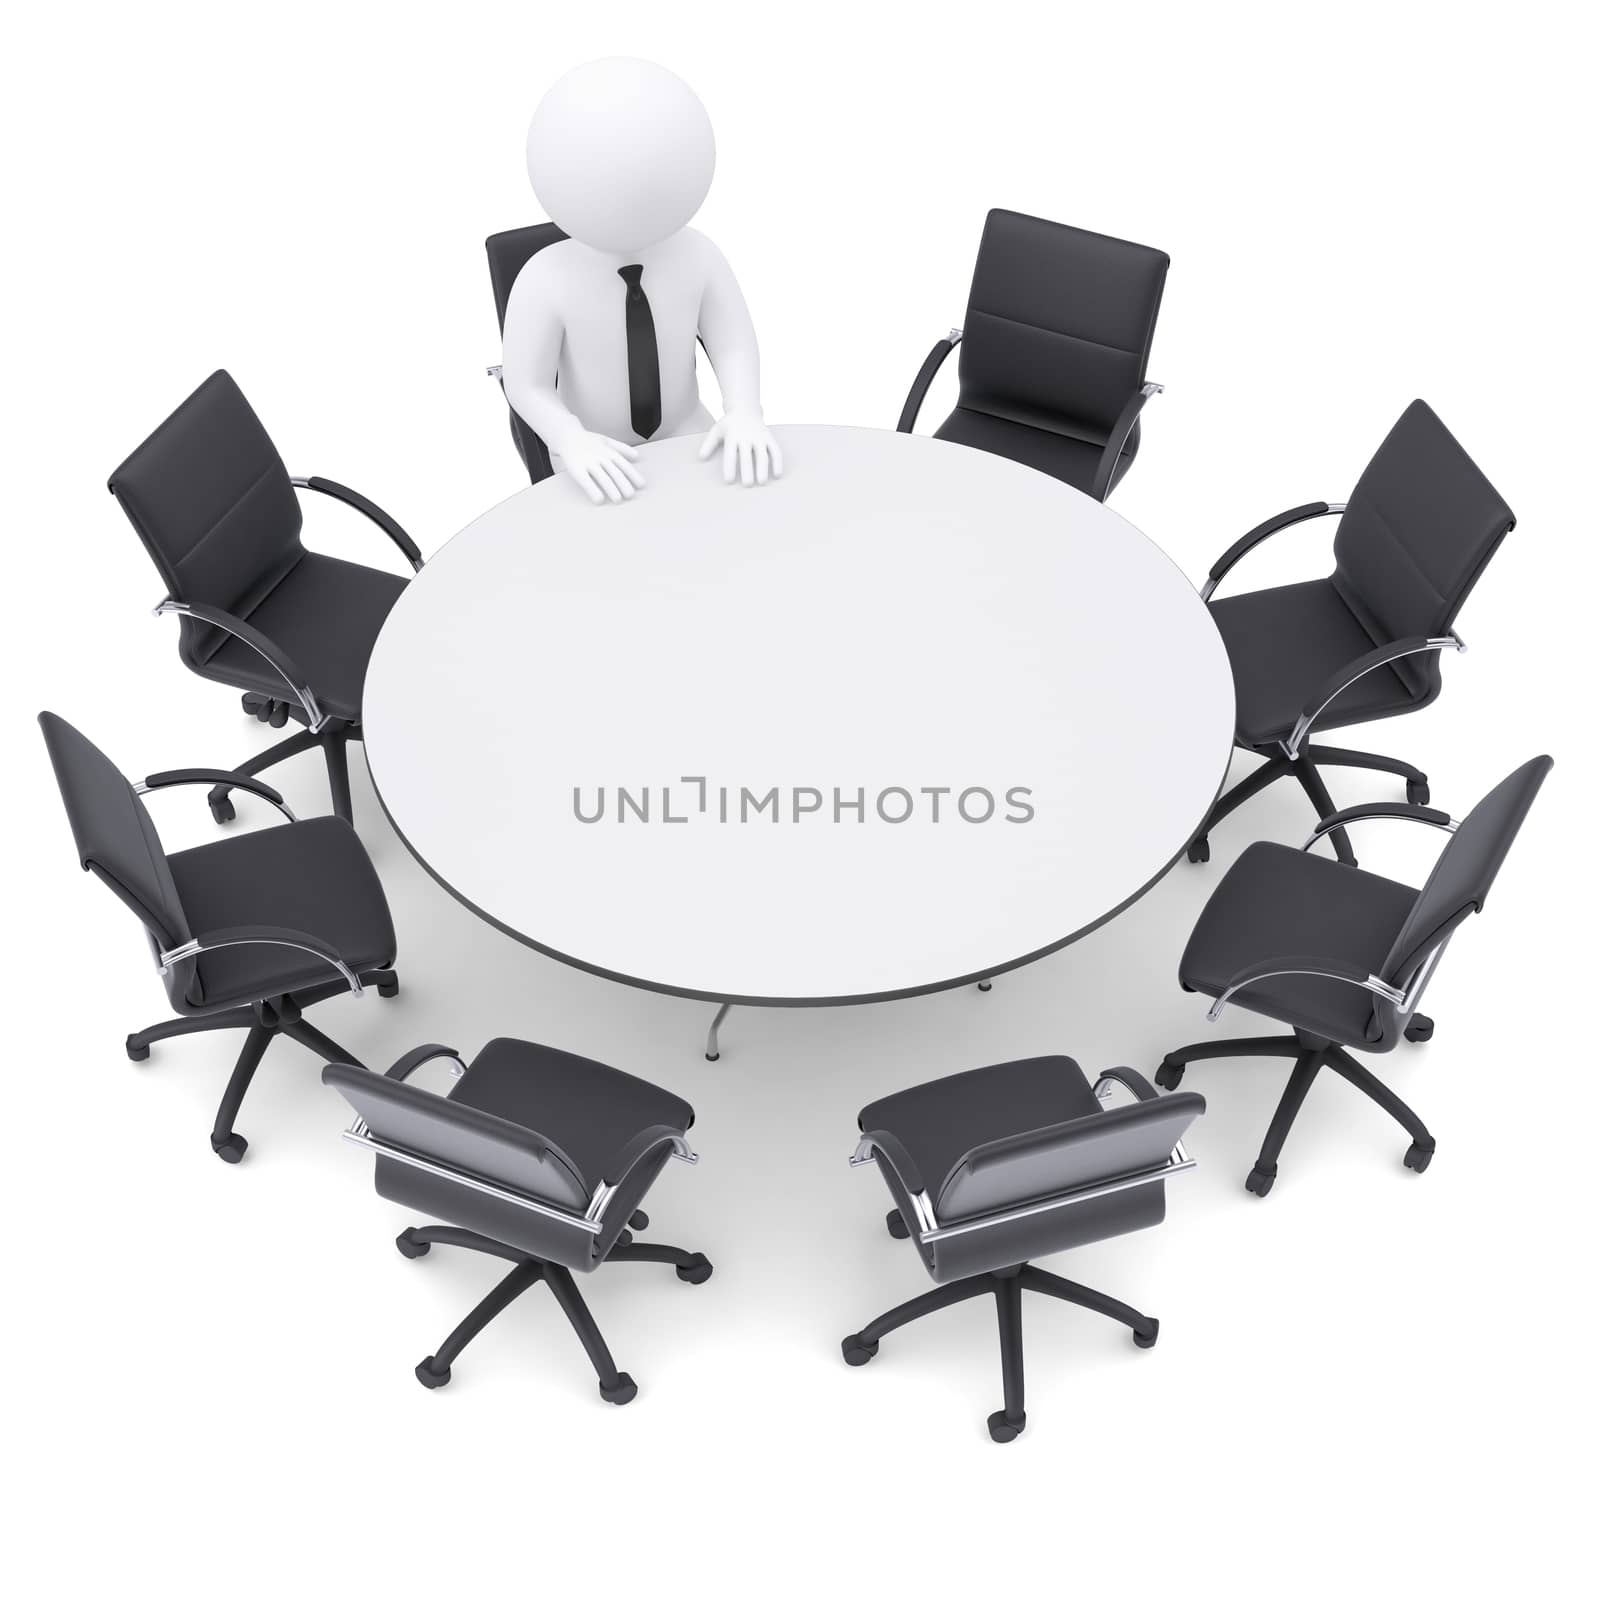 3d white man at the round table. Seven empty chairs. The concept is not complete conference